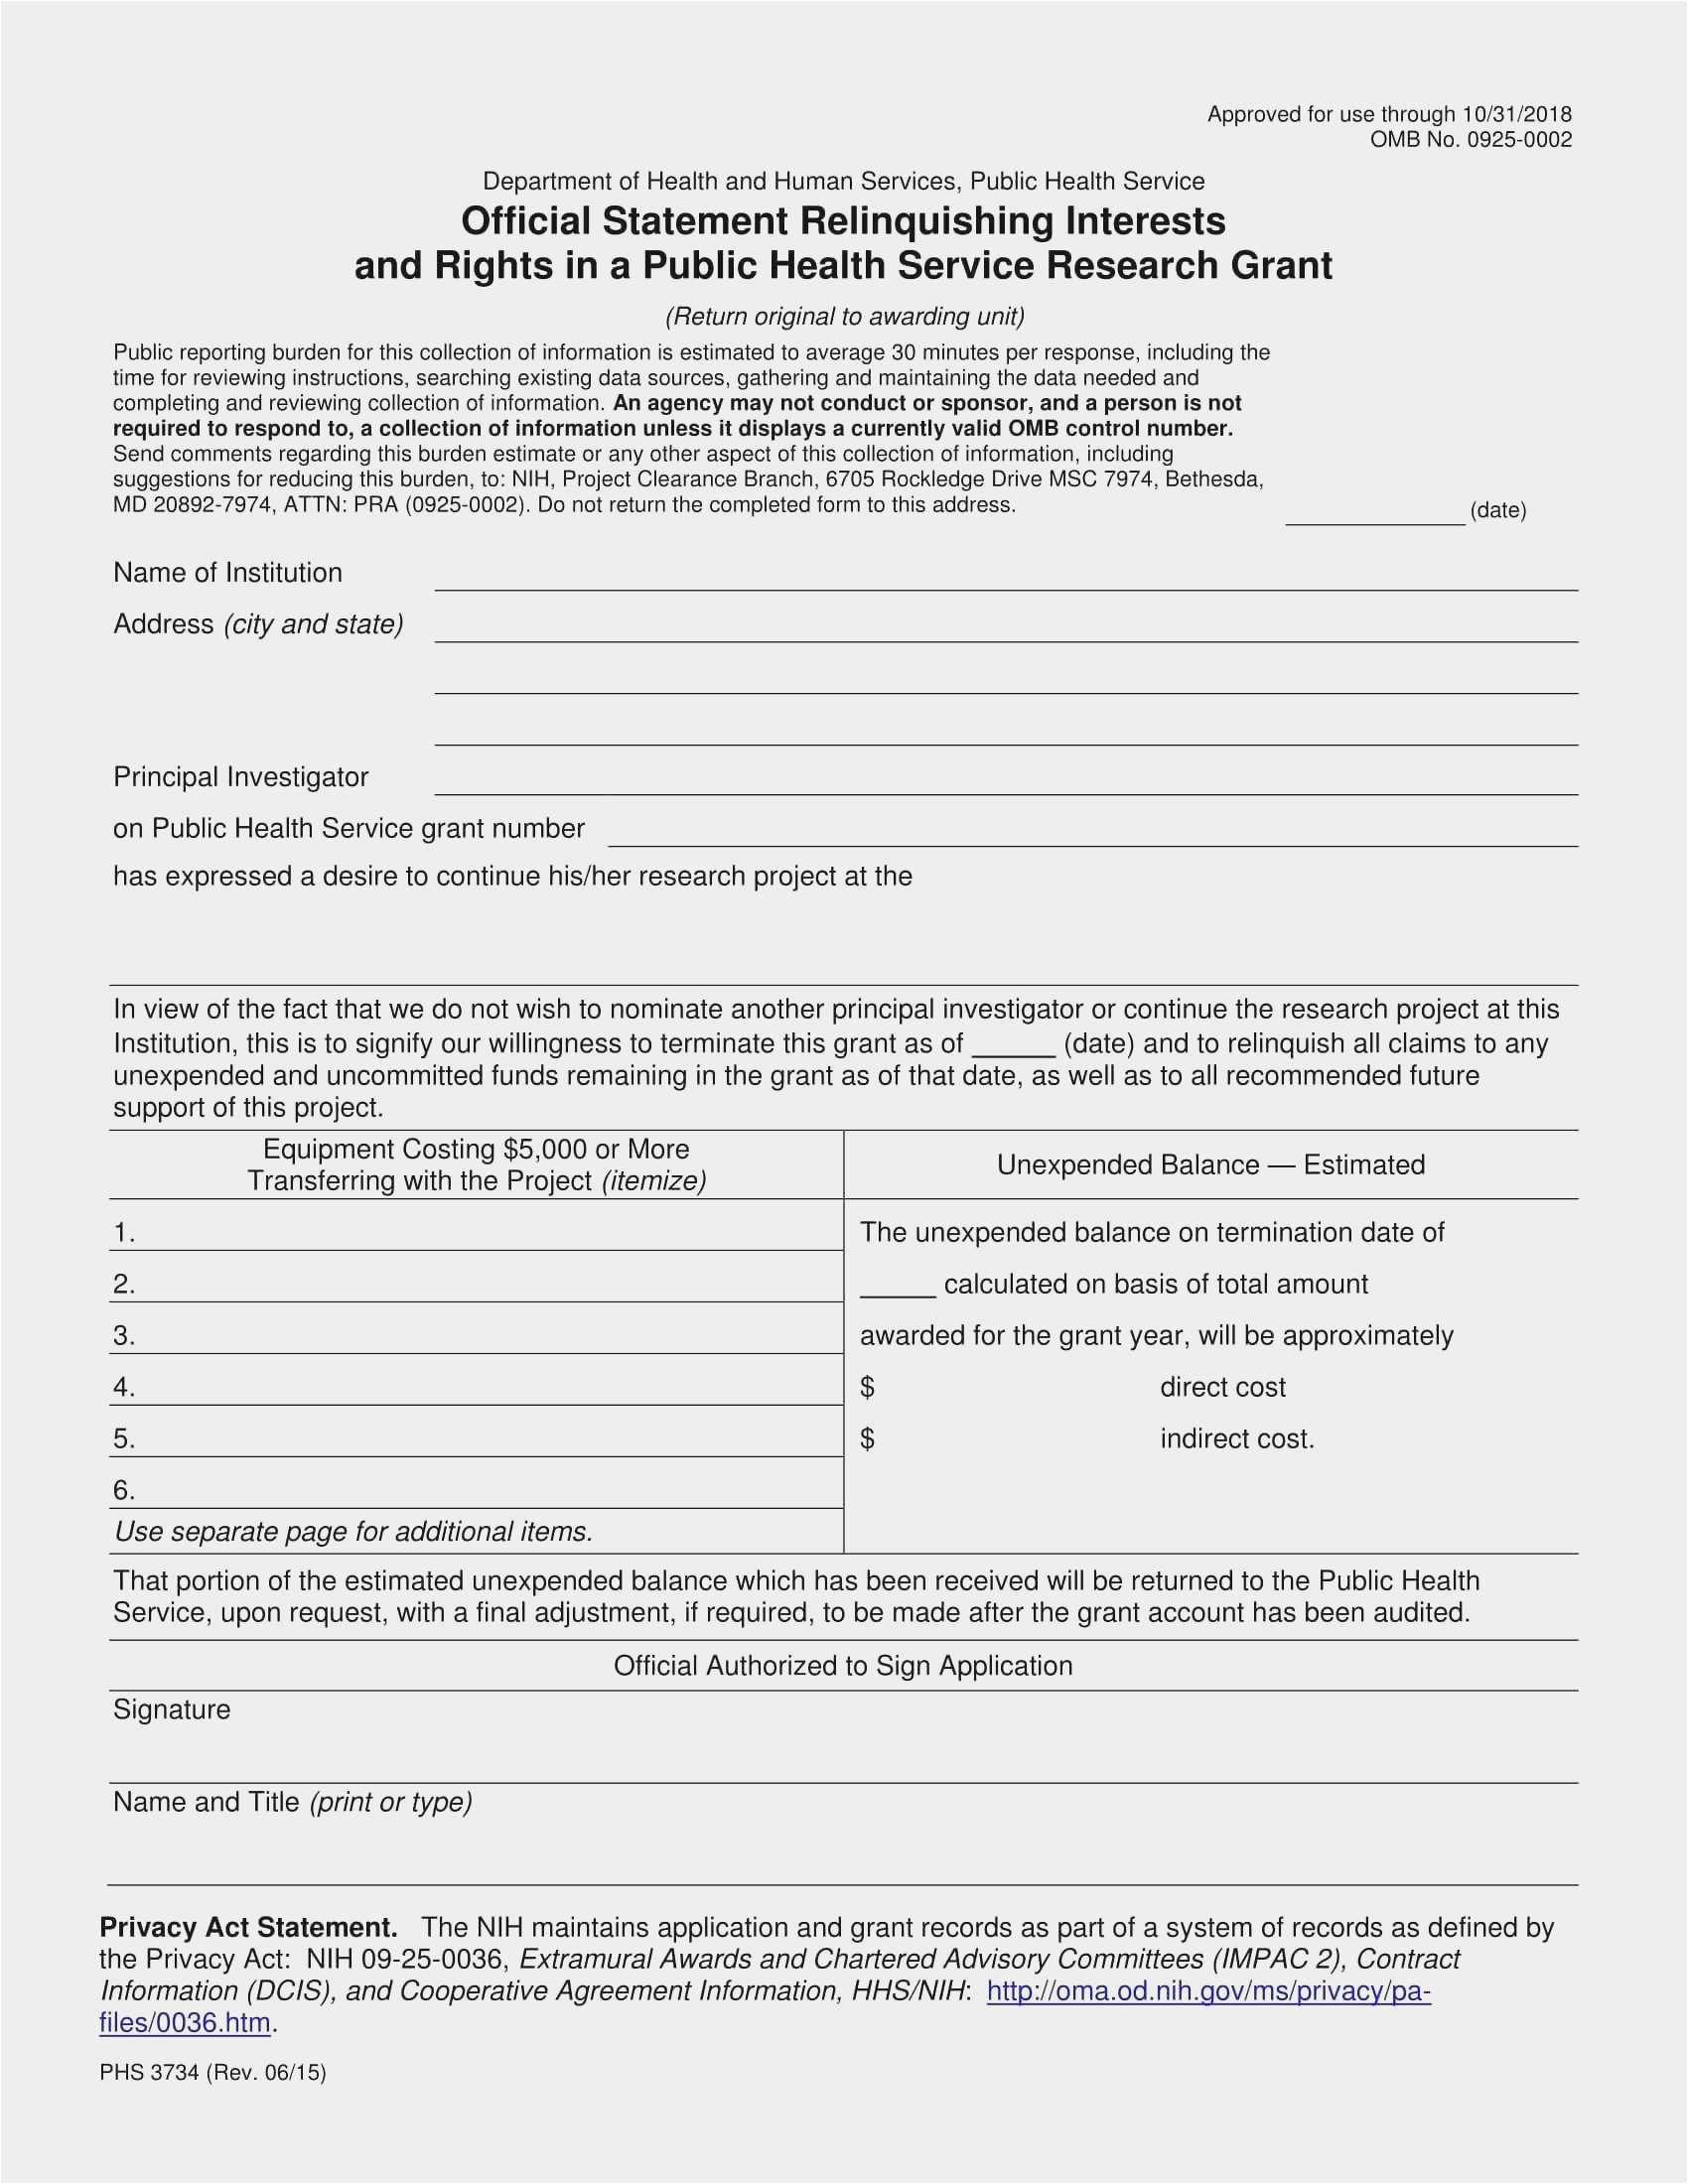 Sweat Equity Agreement Template Download 58 Investor Agreement Template Model Free Download